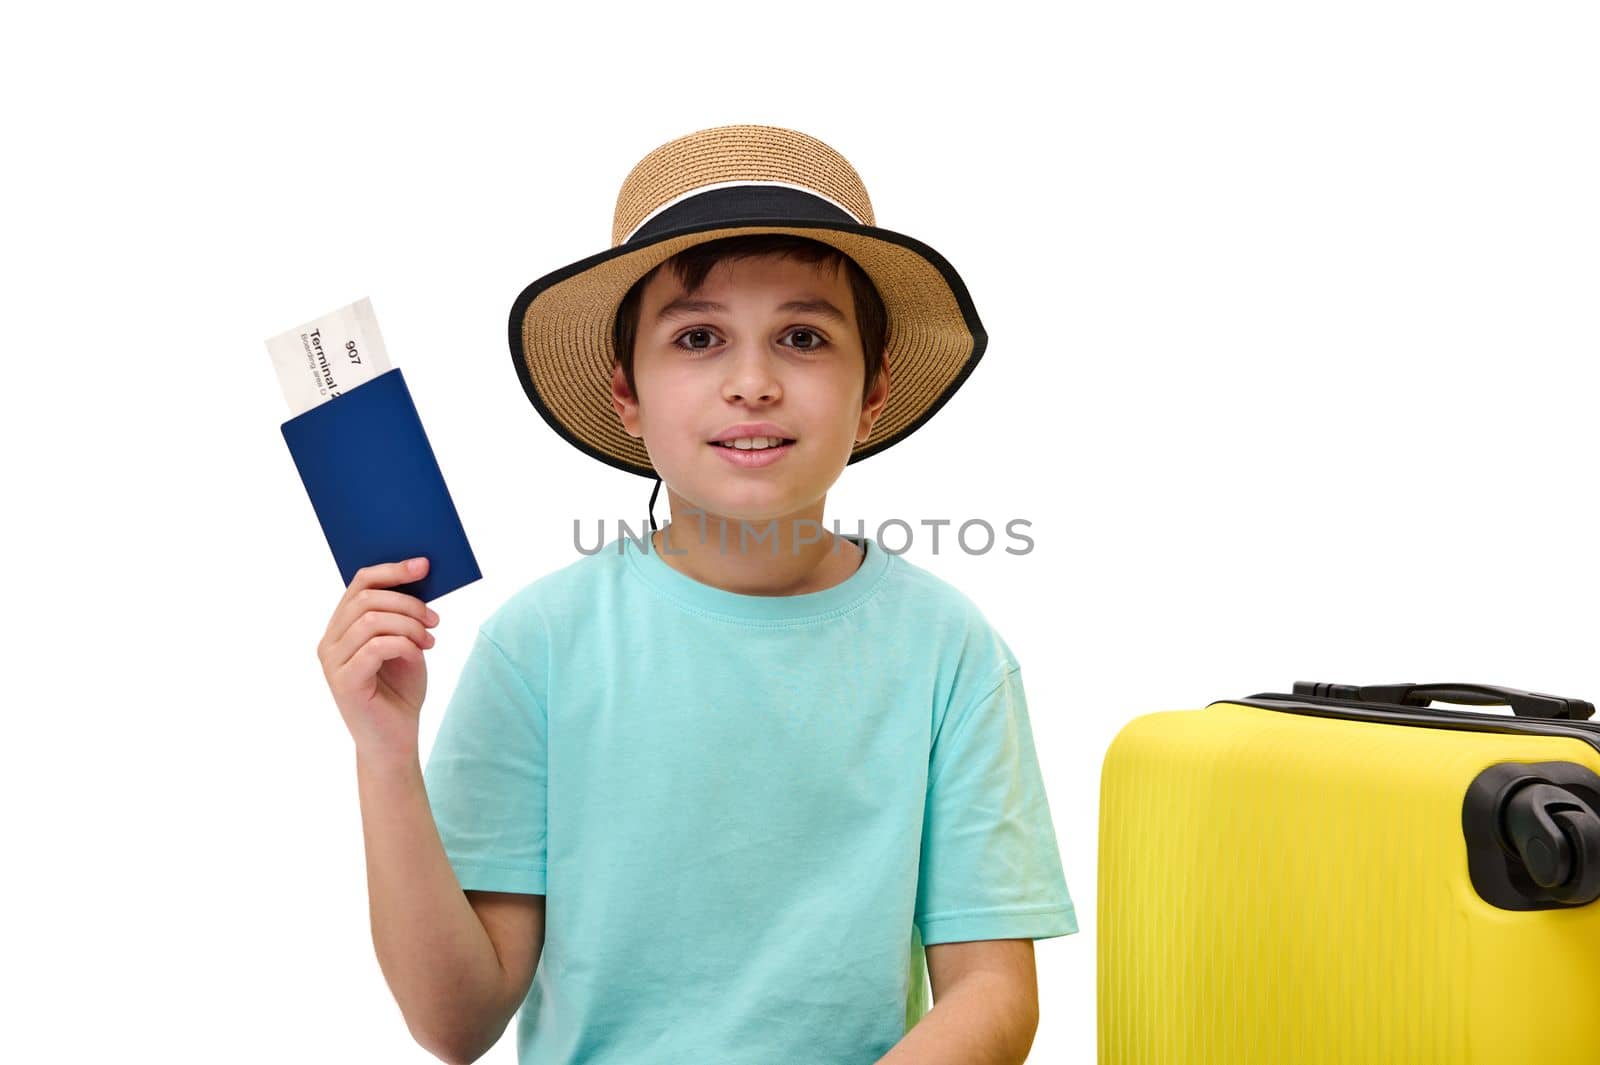 Adorable preteen traveler boy wearing blue t-shirt and straw hat, going for summer vacations, shows boarding pass to camera, cutely smiles sitting near yellow suitcase, isolated over white background